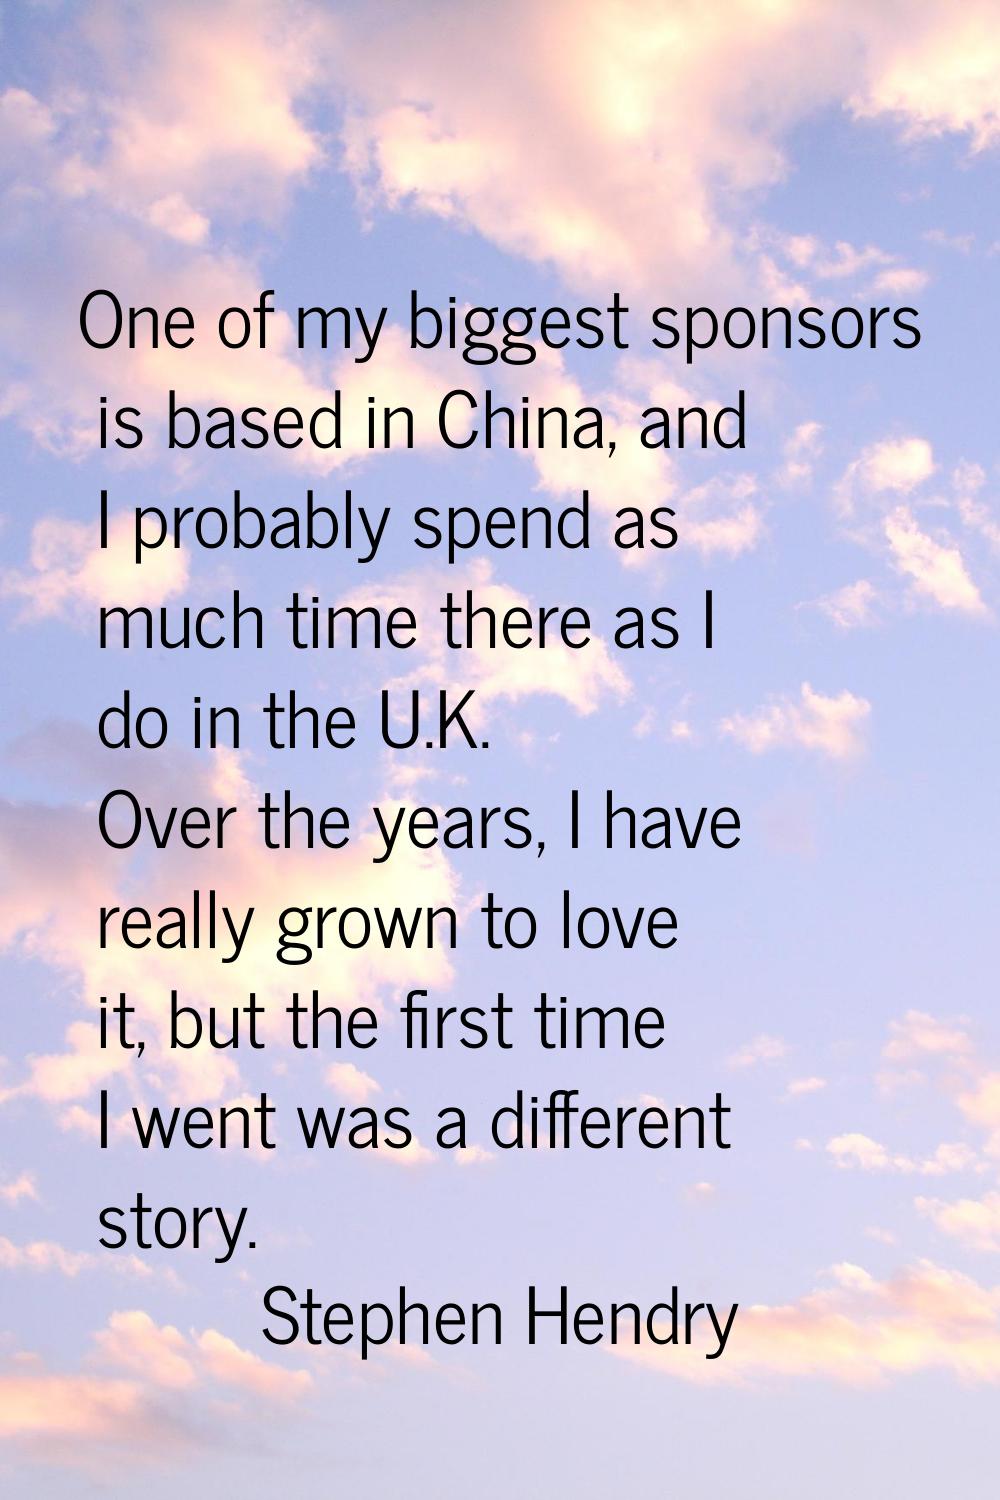 One of my biggest sponsors is based in China, and I probably spend as much time there as I do in th